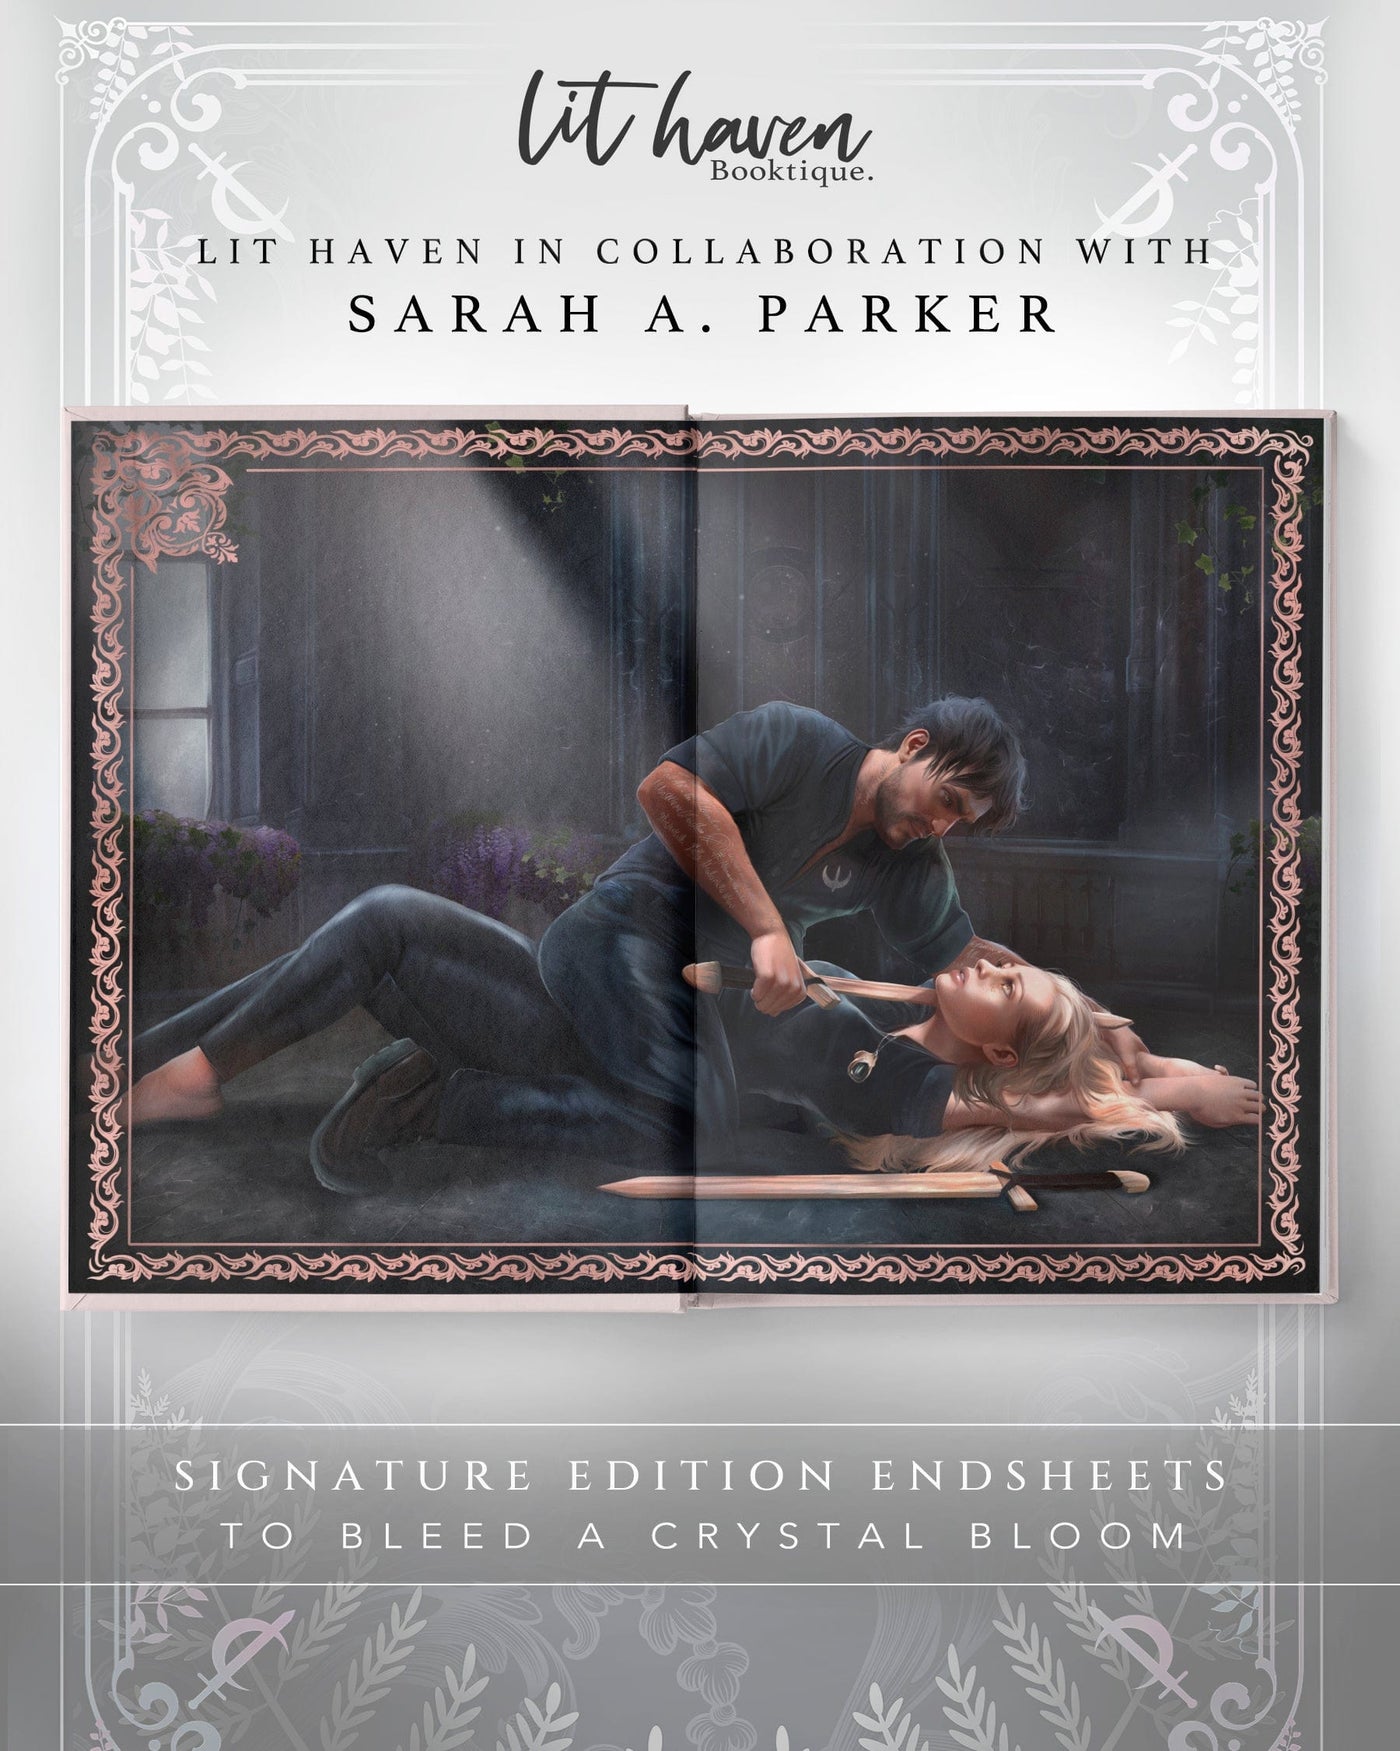 Lit Haven Booktique Book Preorder - To Bleed A Crystal Bloom Signature Edition